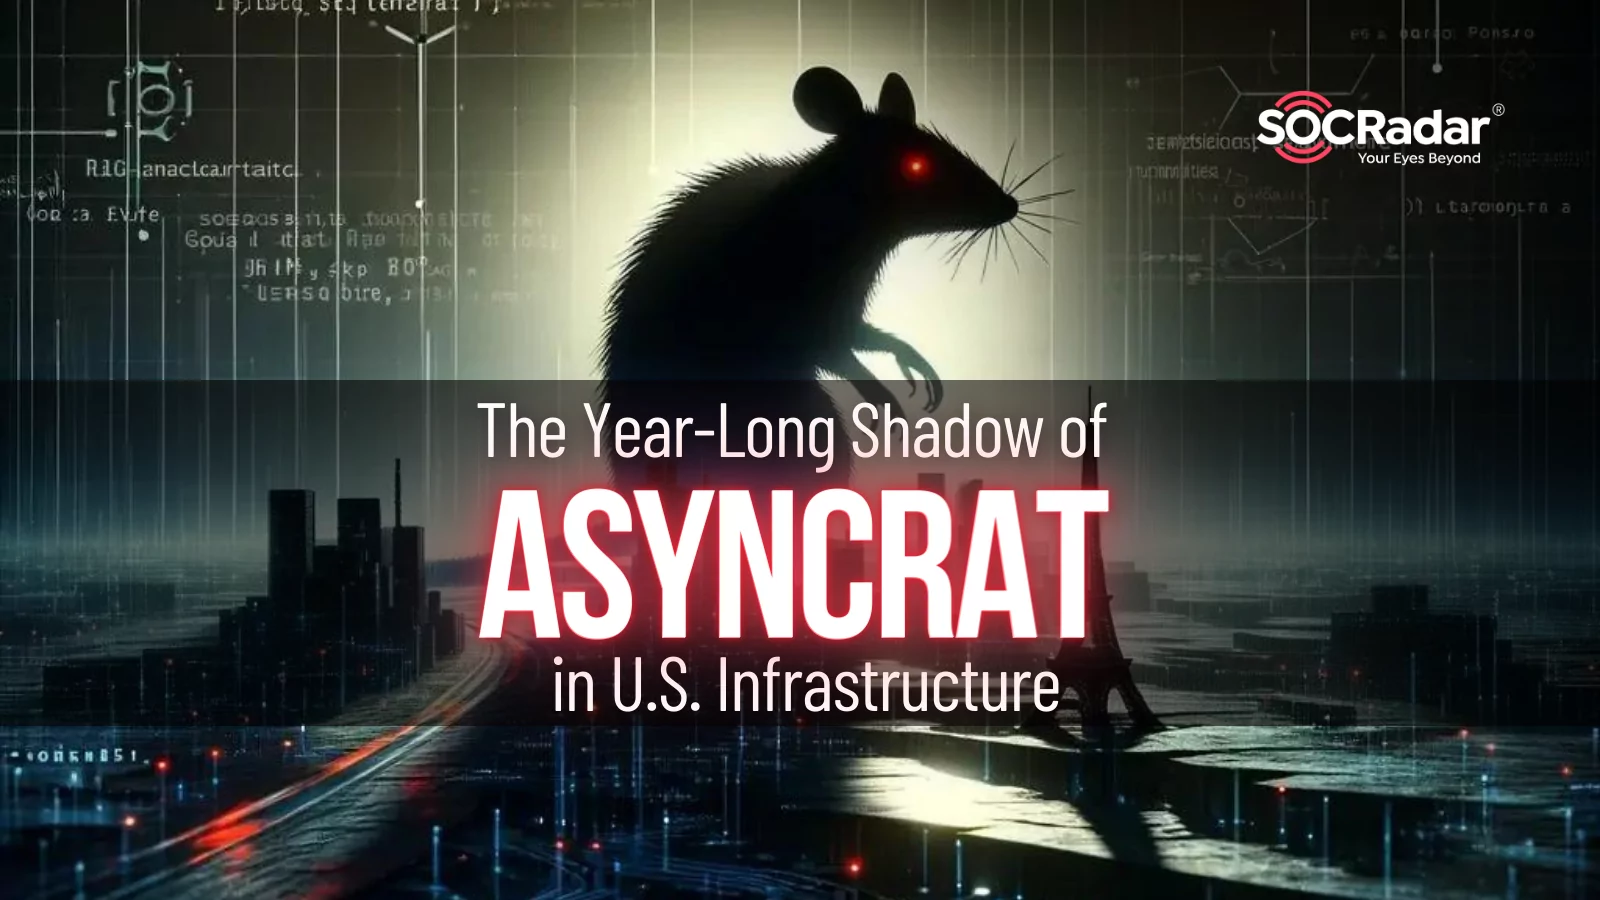 SOCRadar® Cyber Intelligence Inc. | Campaign Alert: The Year-Long Shadow of AsyncRAT in U.S. Infrastructure